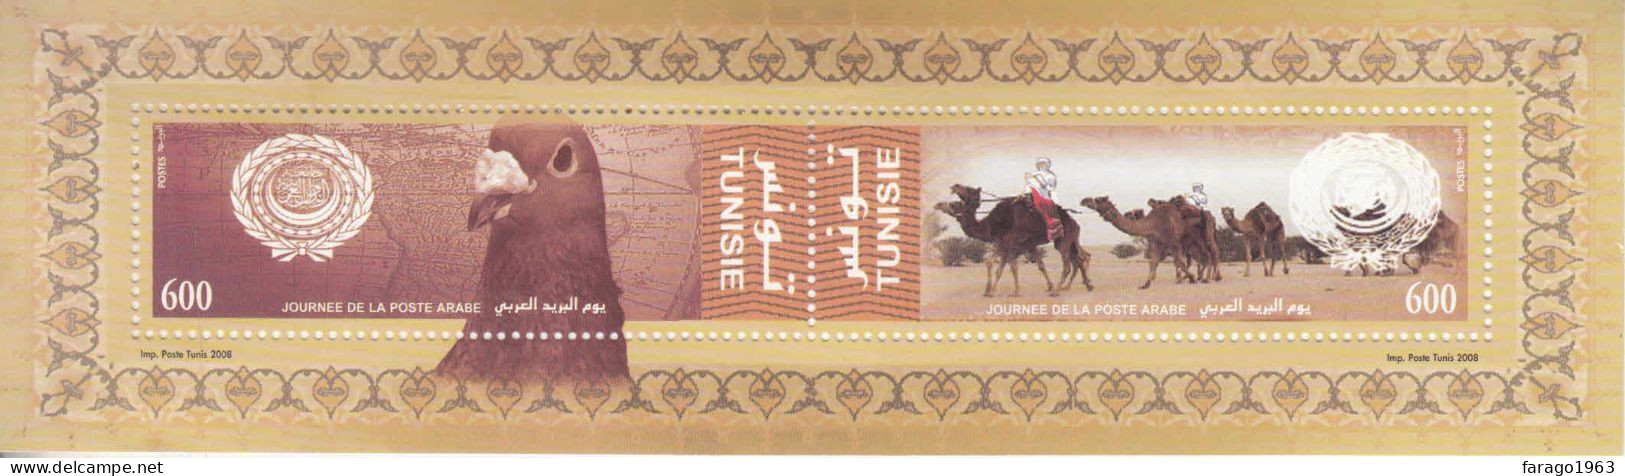 2008 Tunisia Arab Post Day Camels Pigeon JOINT ISSUE Souvenir Sheet MNH - Tunisia (1956-...)